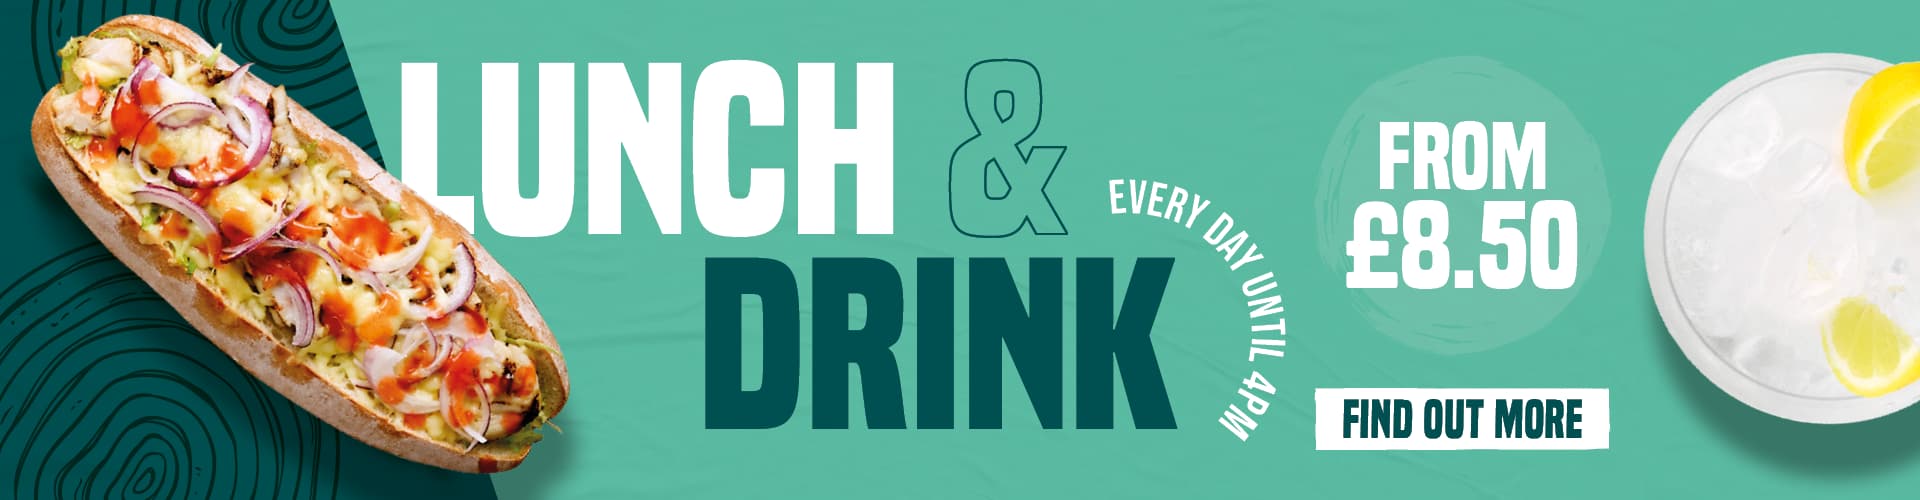 Lunch & Drink, Every Day Until 4pm, From £8.50. Find Out More.